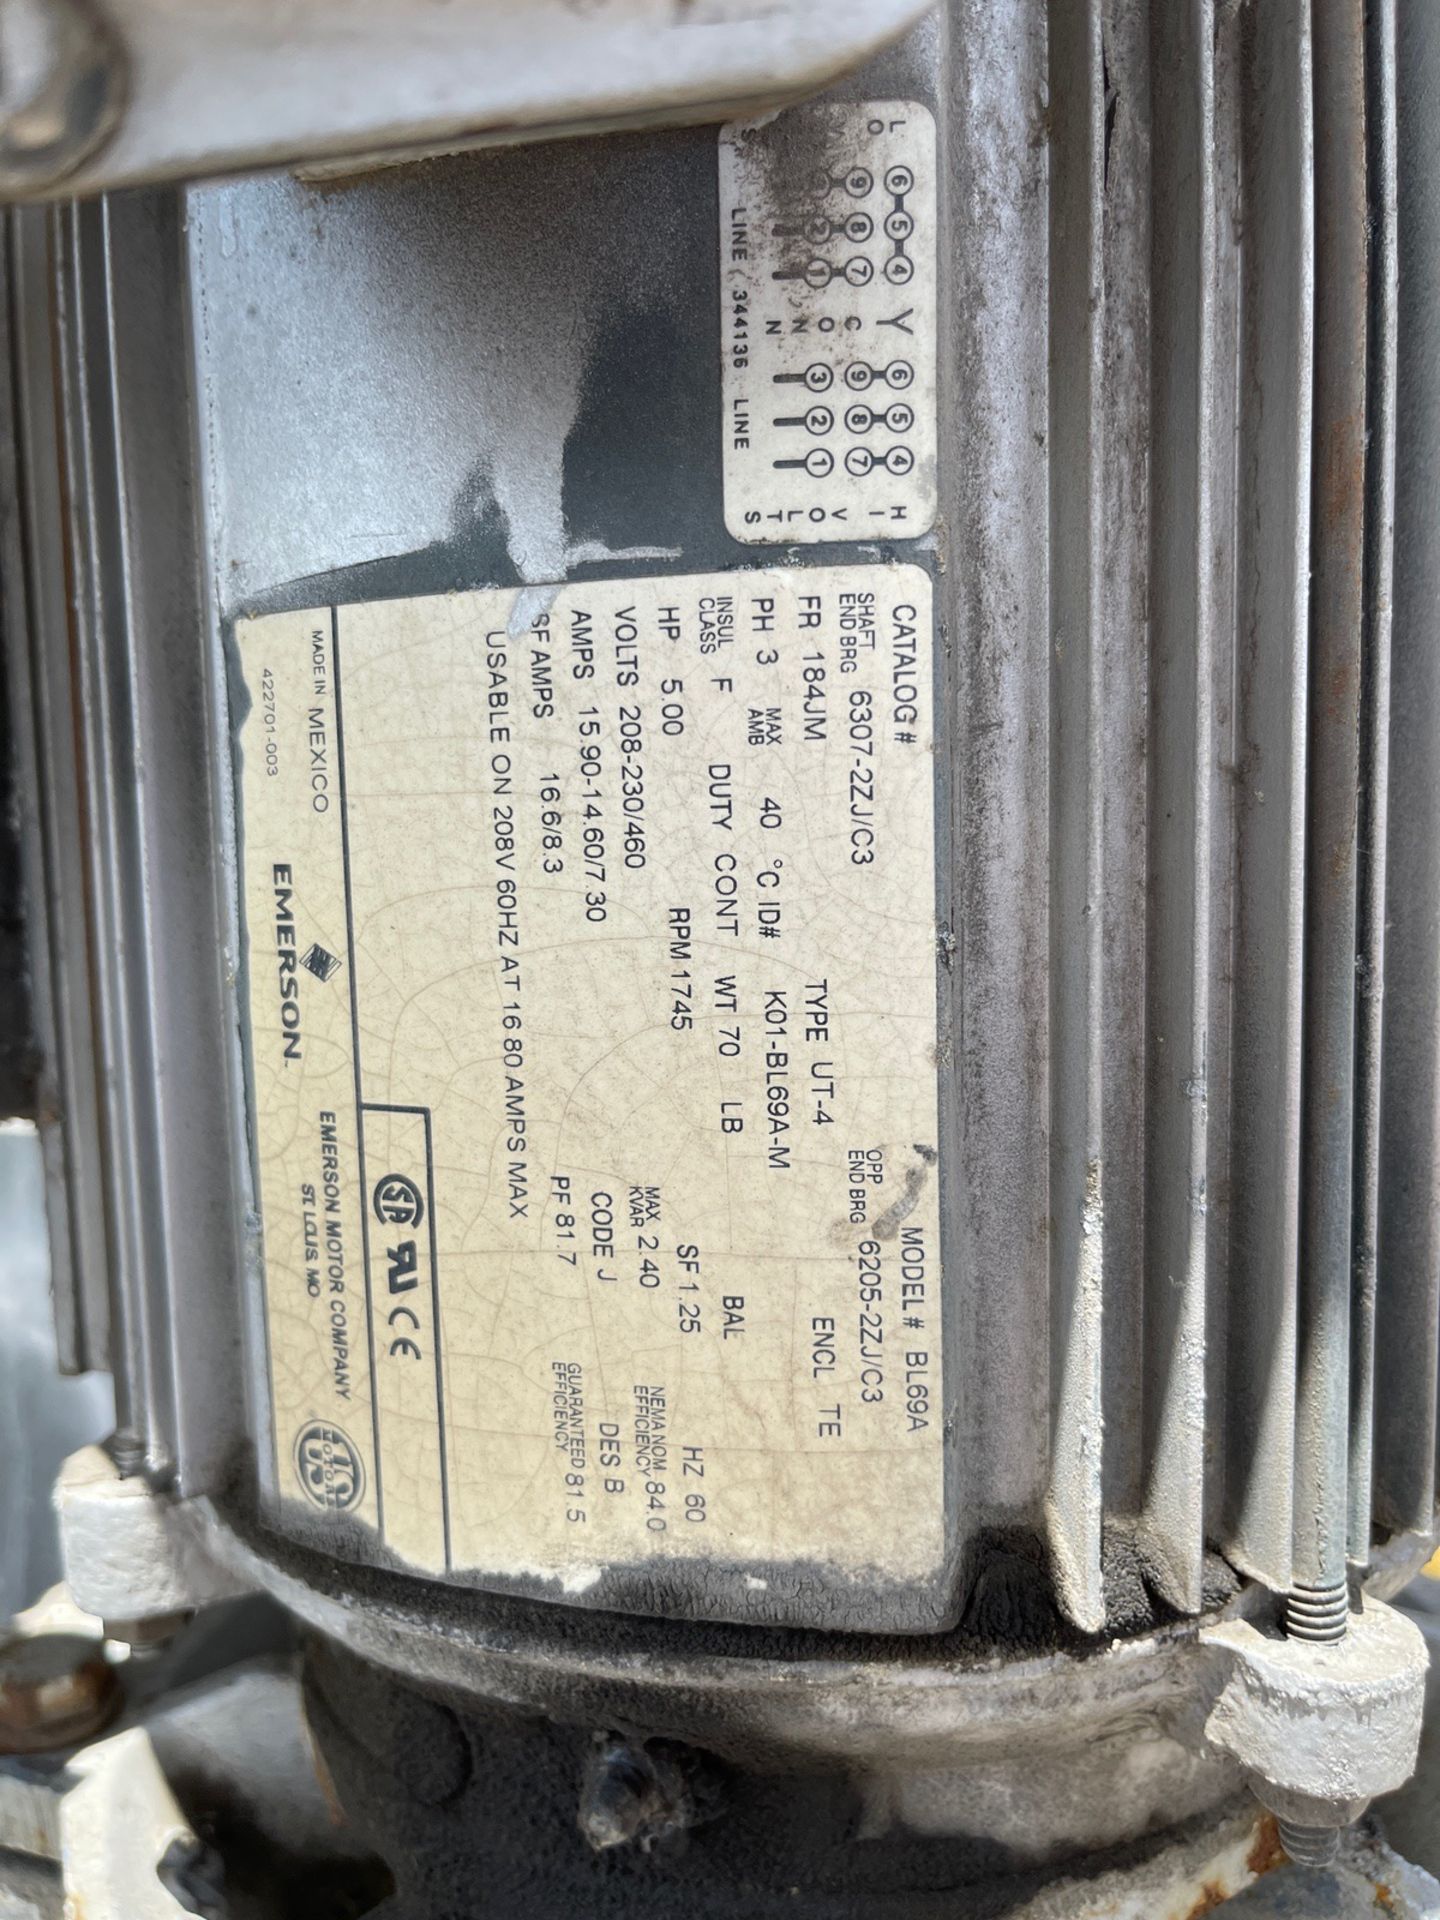 EVAPCO Cooling Tower, Model PMCB-350, Serial # 288337 | Rig Fee $5500 - Image 3 of 4